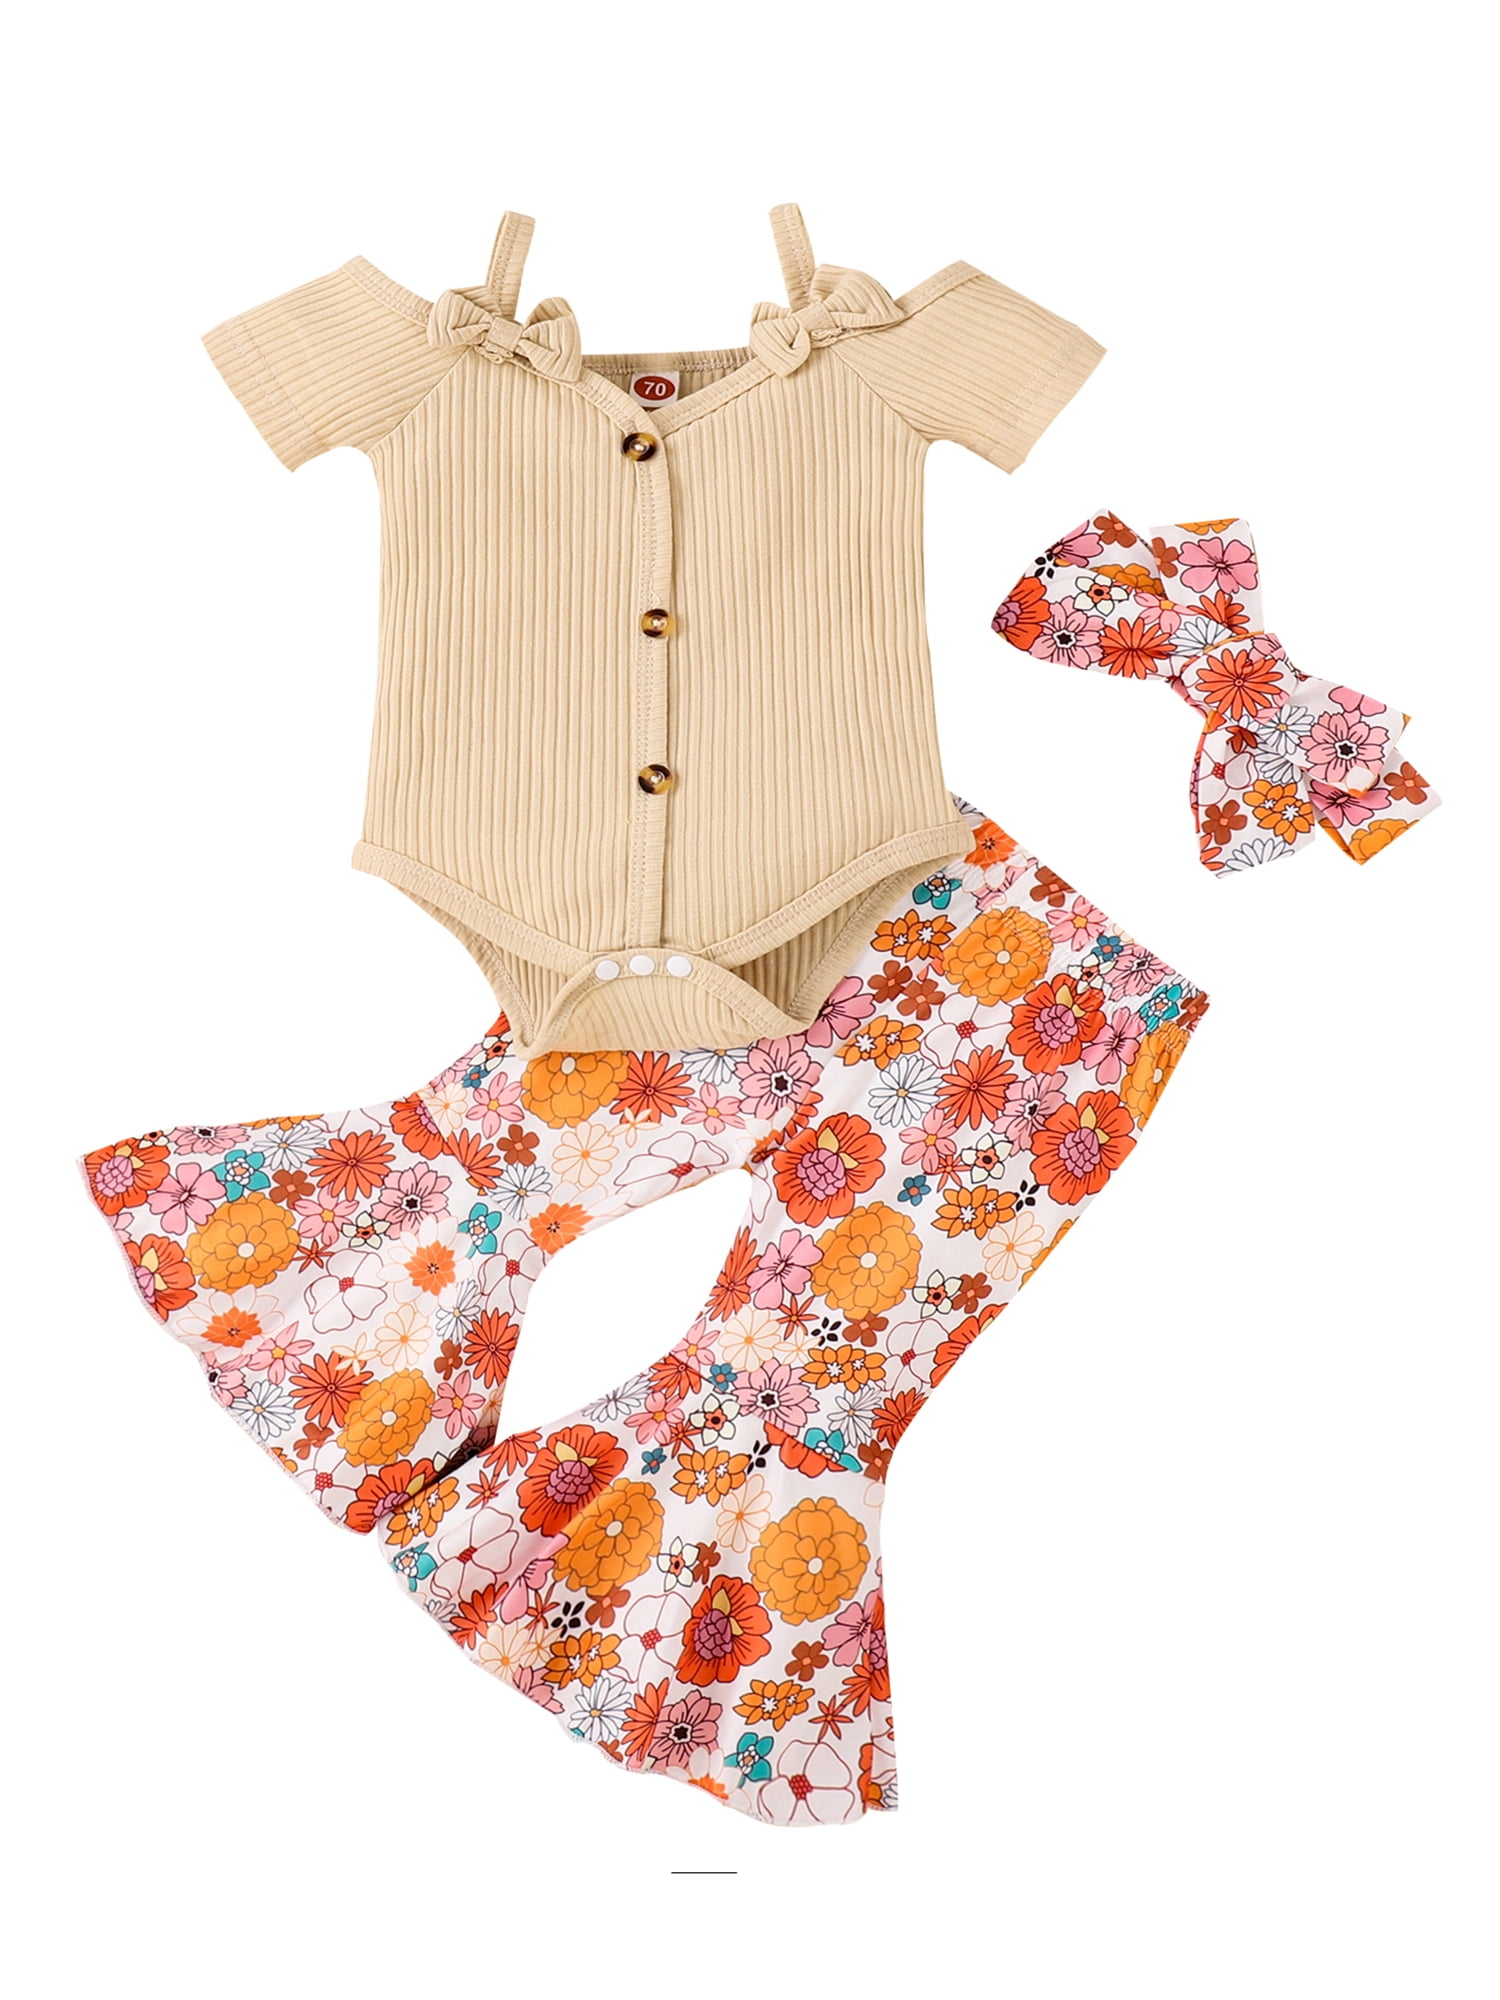 GXFC-Baby-Girls-Summer-Outfits-Clothes-3M-6M-9M-12M-18M-24M-Infant-Off-Shoulder-Sling-Romper-Floral-Print-Flare-Pants-Headband-3Piece-Casual